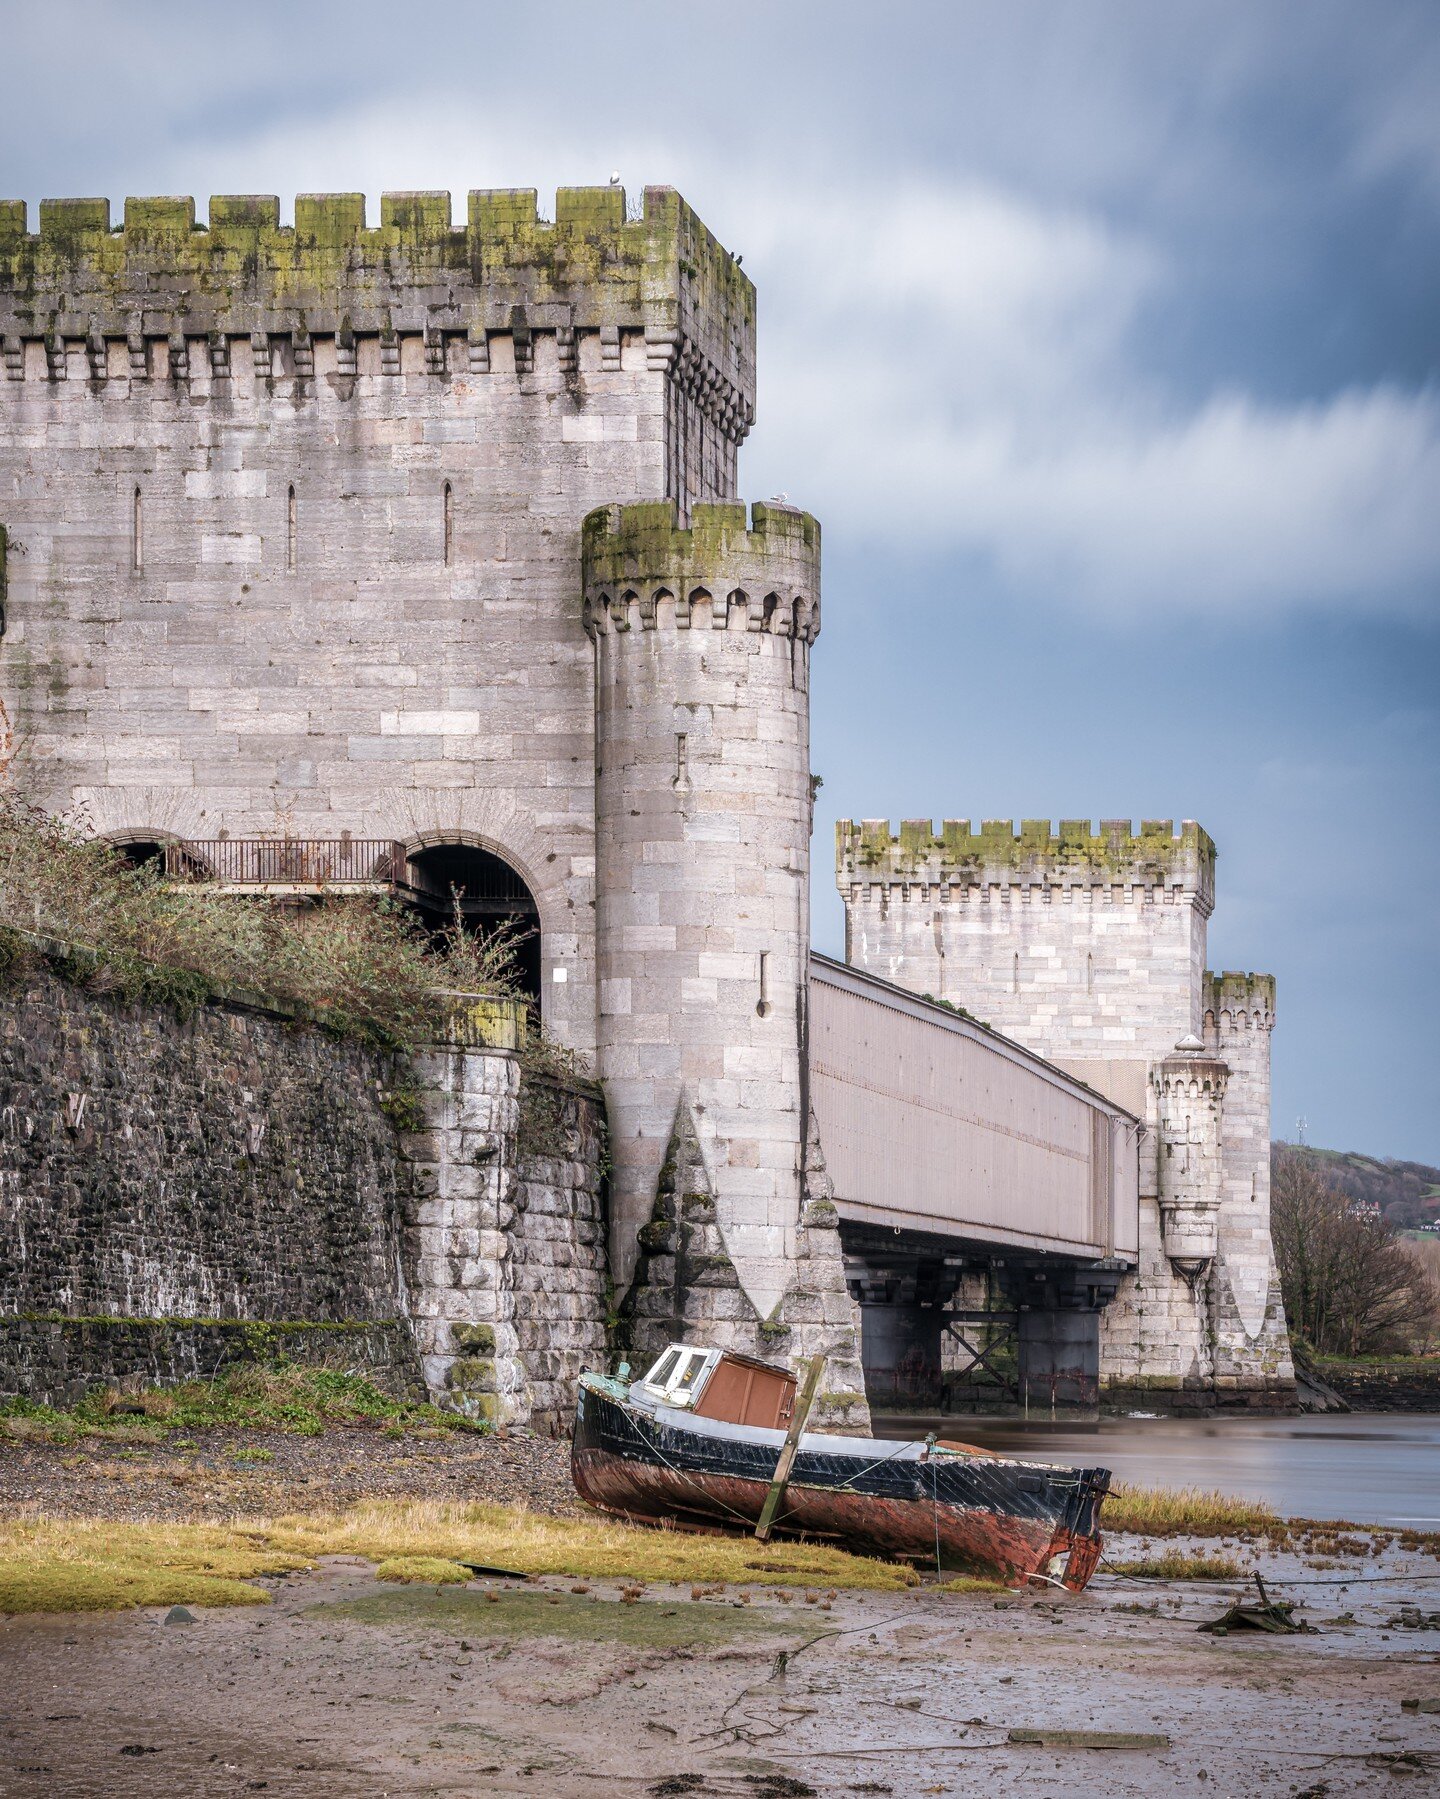 The rear side of the Conwy Railway Bridge, which was designed by railway engineer Robert Stephenson Stephenson and his collaborators, who invented the wrought-iron box-girder structure to bridge the River Conwy in a single span.

During May 1846, gro